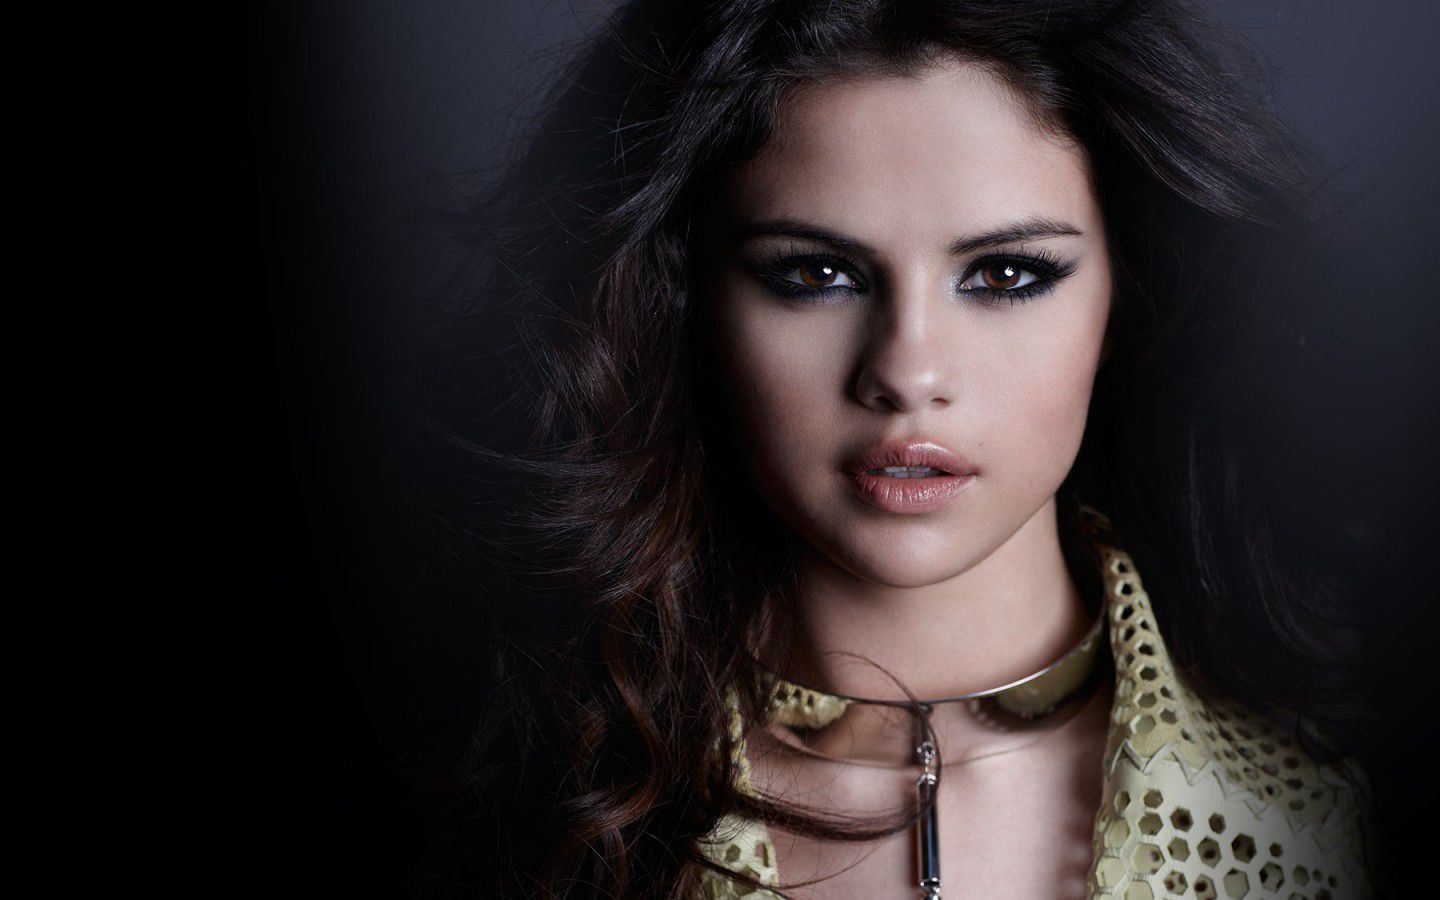 Selena Gomez Wallpapers Hd 2015 | Onlybackground